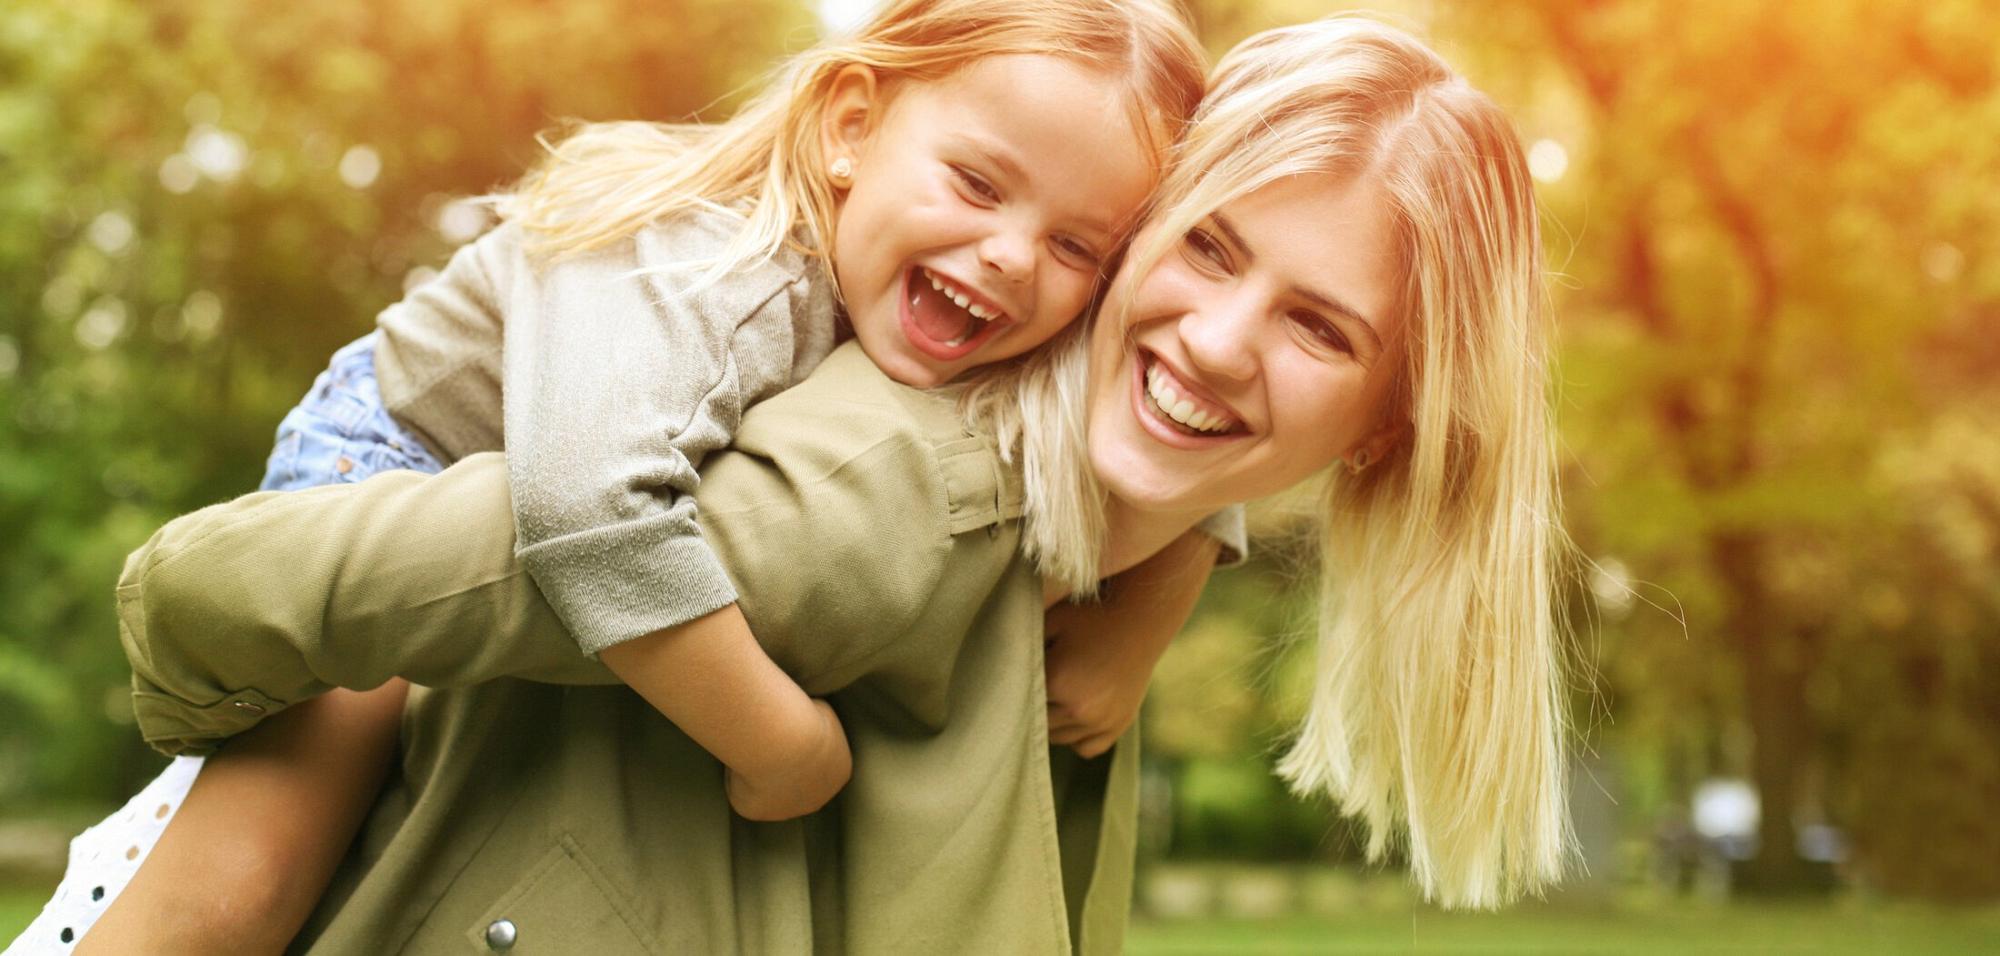 Woman and Daughter smiling